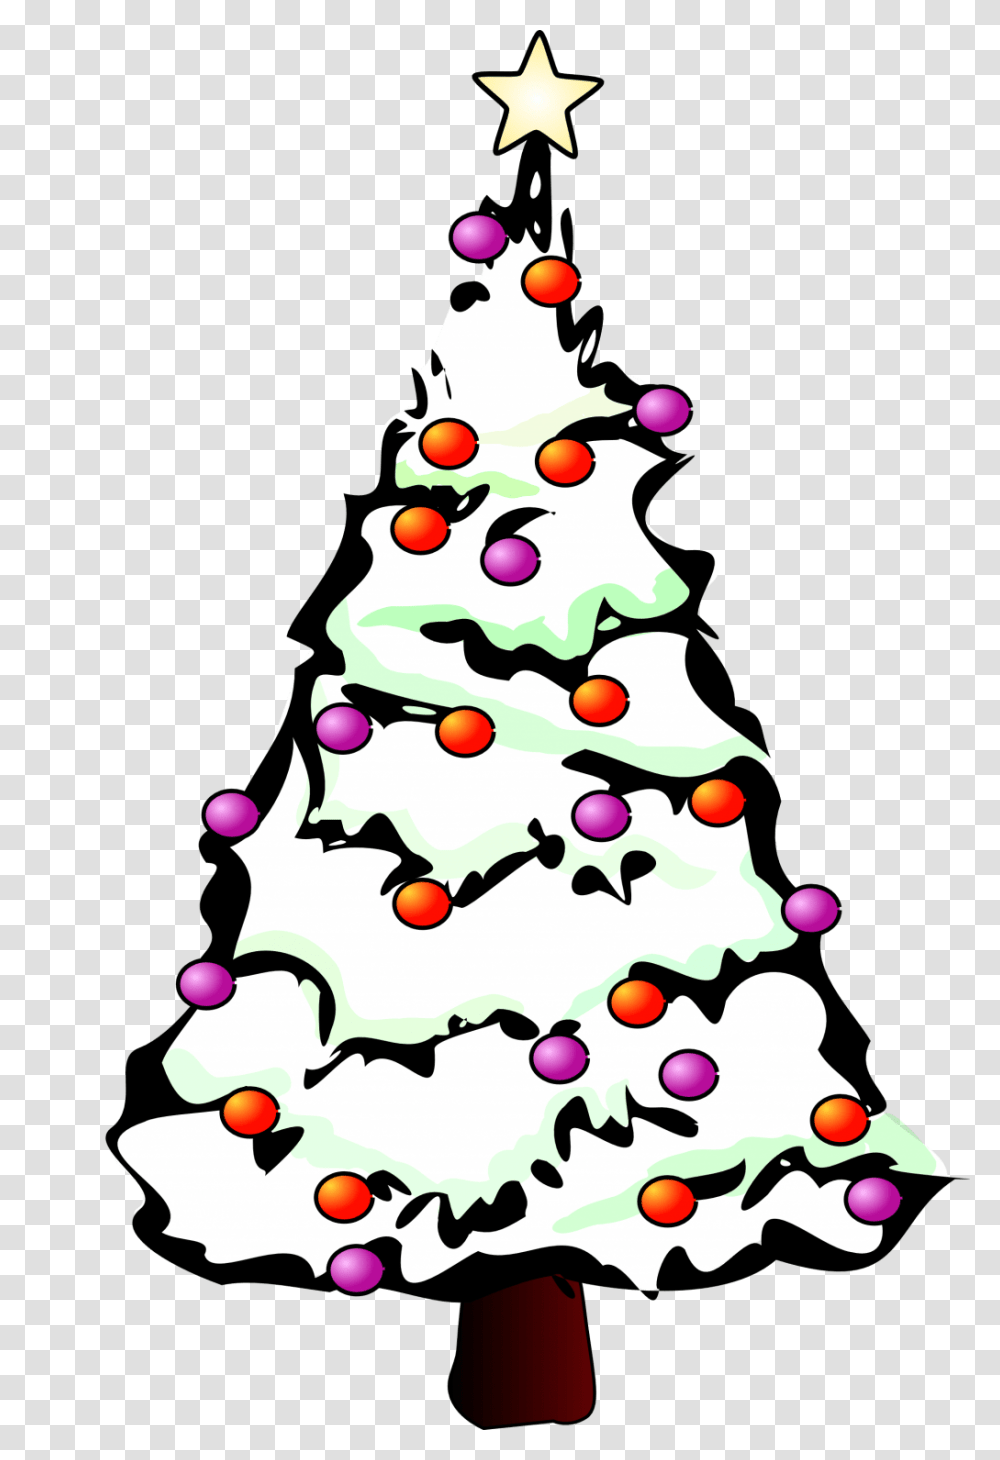 Howling Tree Emoji Tree Freeuse Download Black Collection Tree, Plant, Ornament, Christmas Tree, Star Symbol Transparent Png